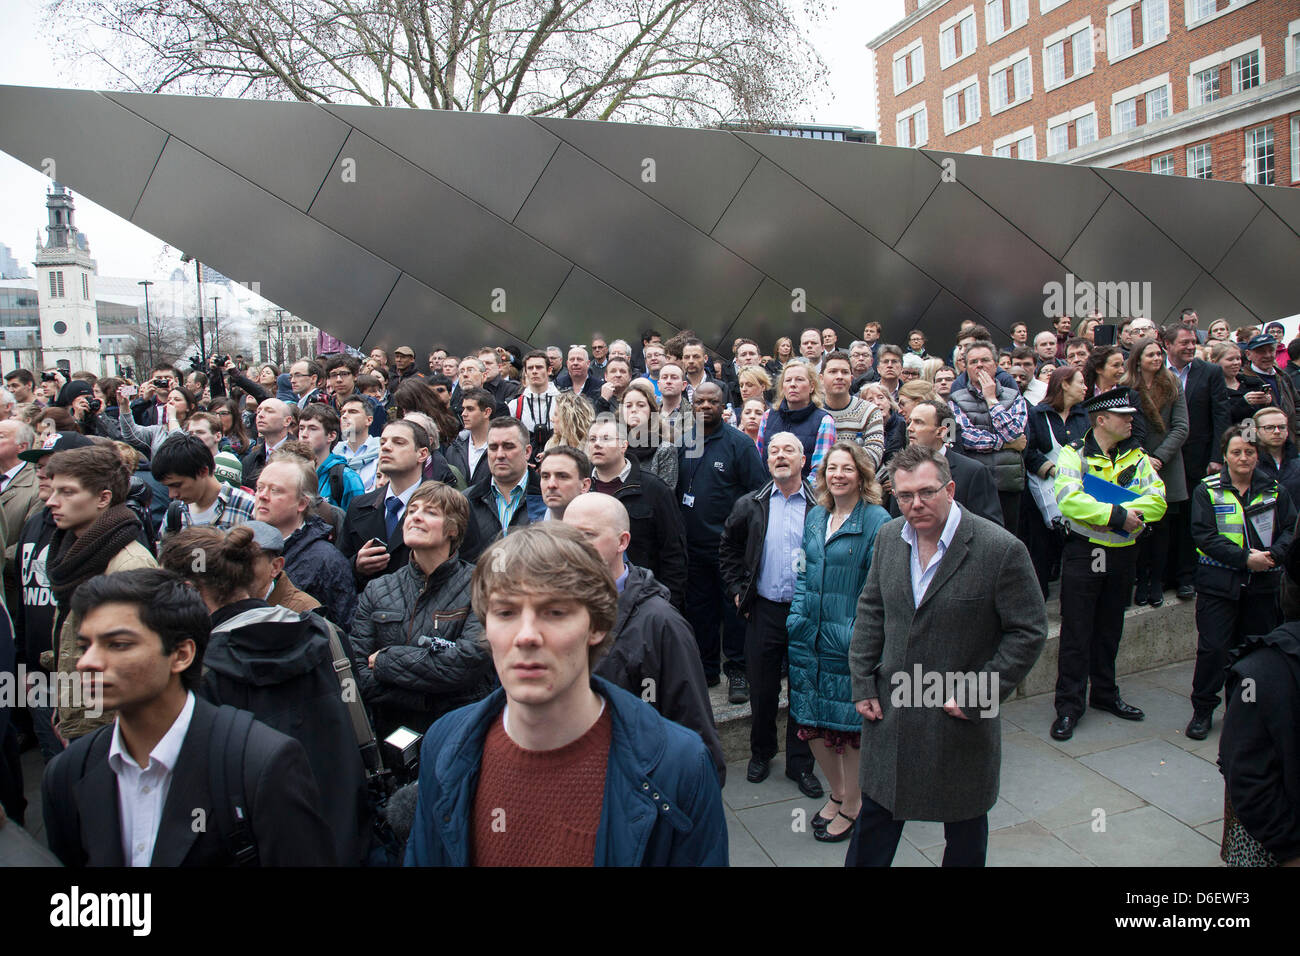 Funeral of former Prime Minister Baroness Margaret Thatcher. Members of the public look on in their hundreds. London, UK. Stock Photo